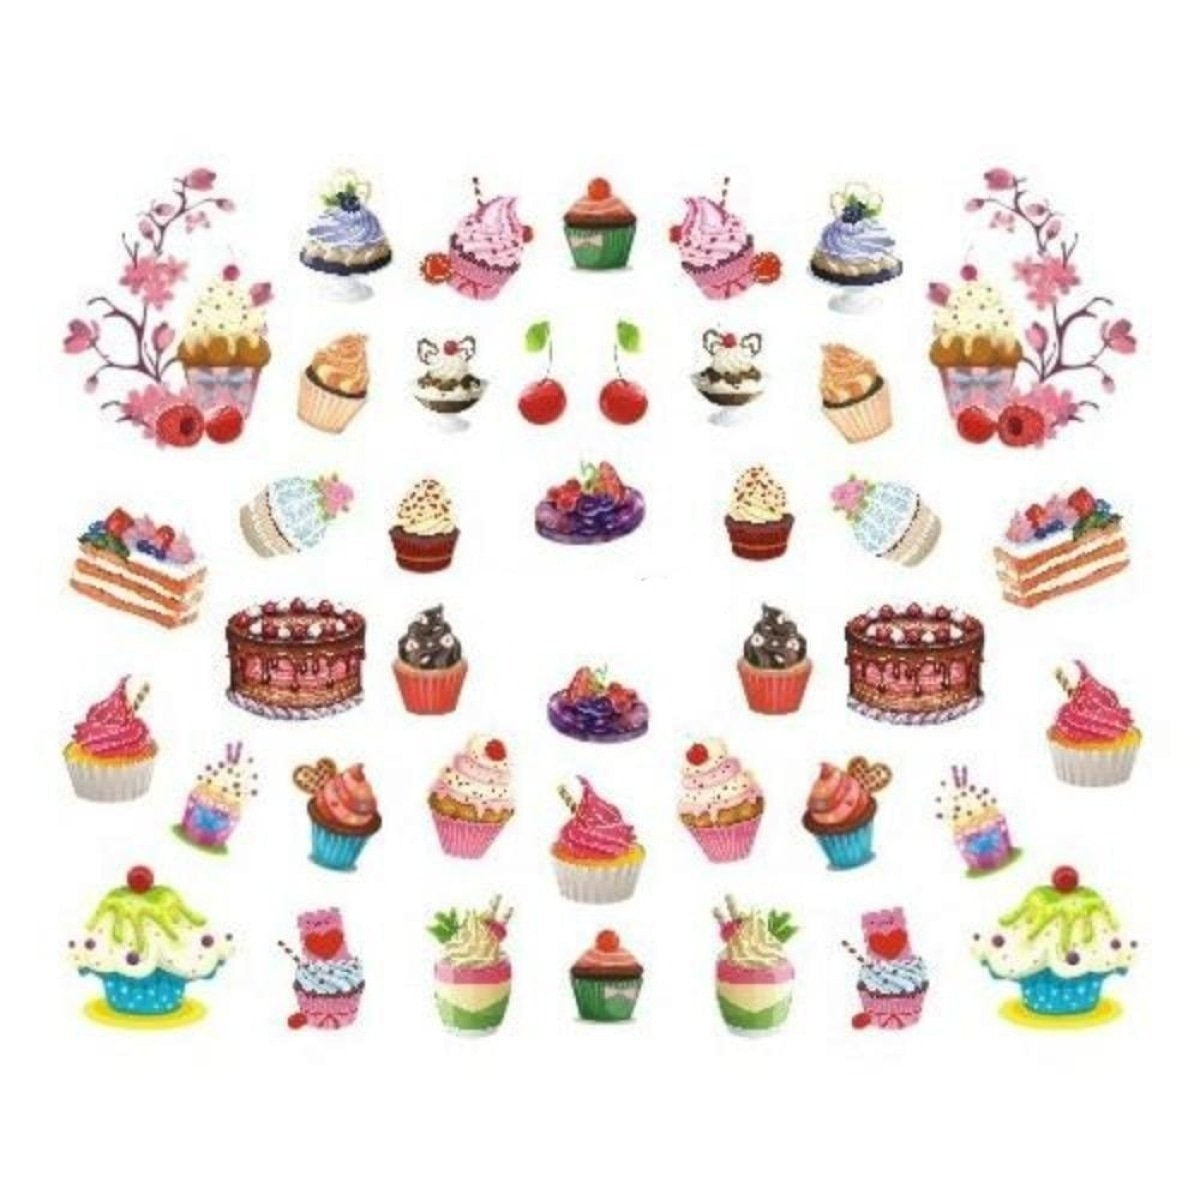 Strawberry Summer Cake & Fruit Stickers For Nails Nail Manicure Art - Stz-477 Sheet